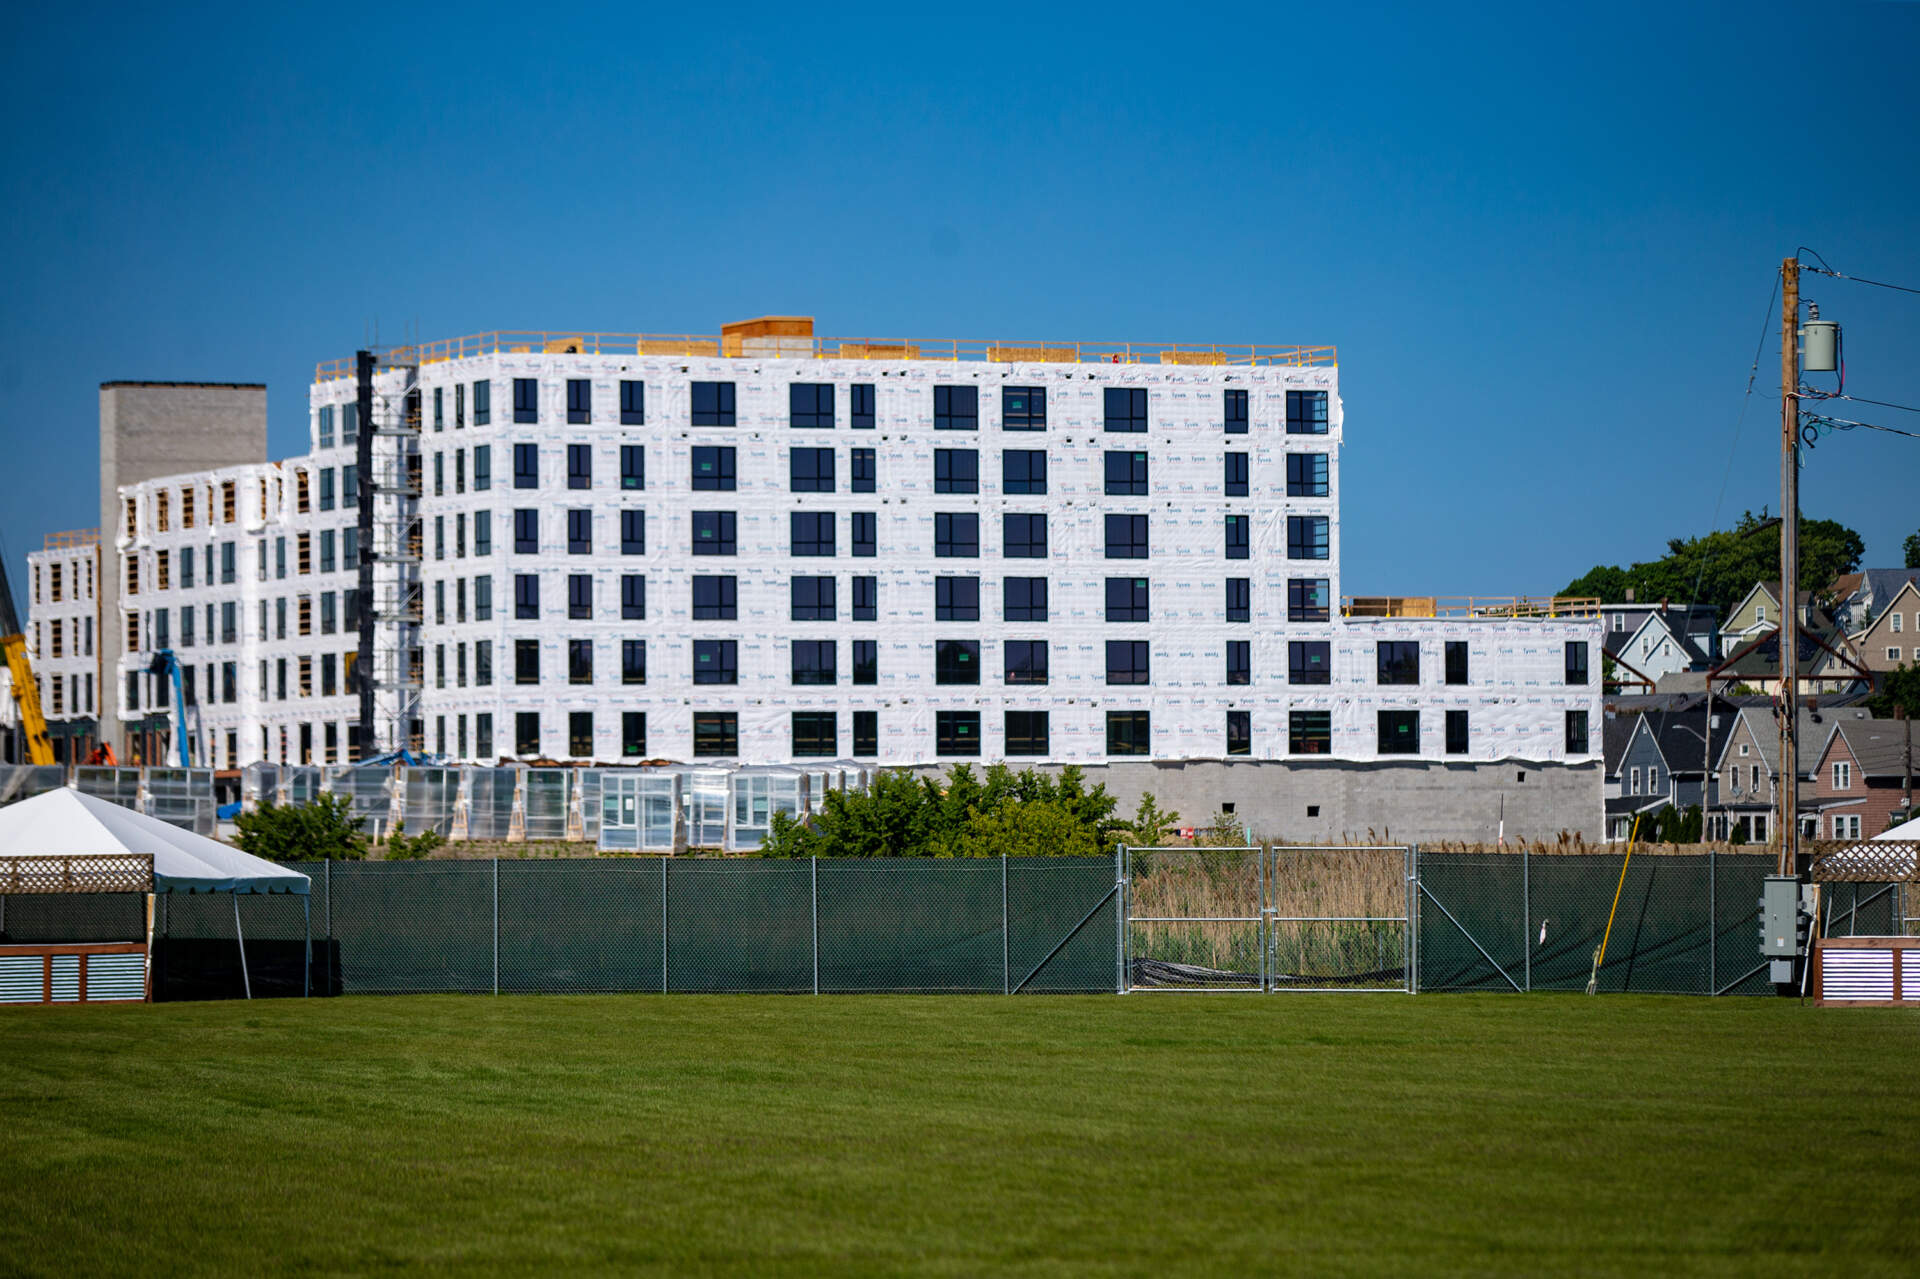 The first residential building of the Suffolk Downs development to be built, Amaya, under construction along Winthrop Avenue in Revere. (Jesse Costa/WBUR)